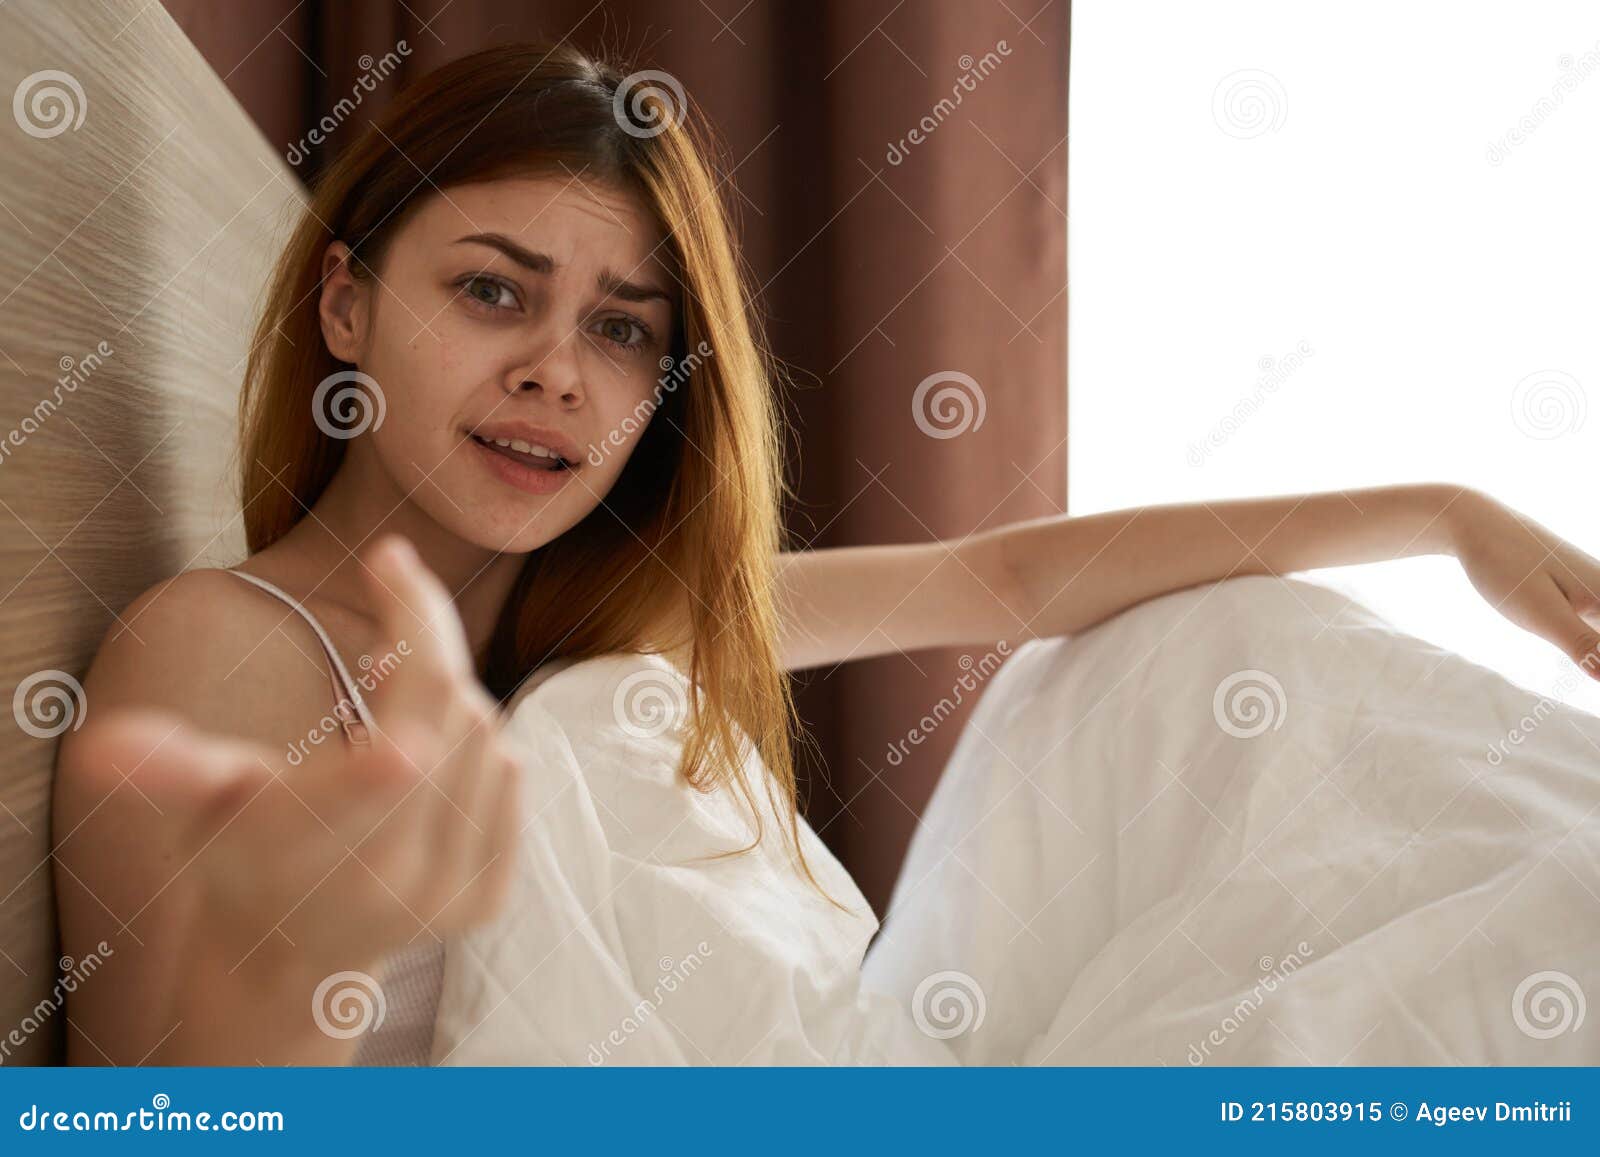 Emotional Woman Lies In Bed Under The Covers And Gestures With Her Hands Near The Copy Space